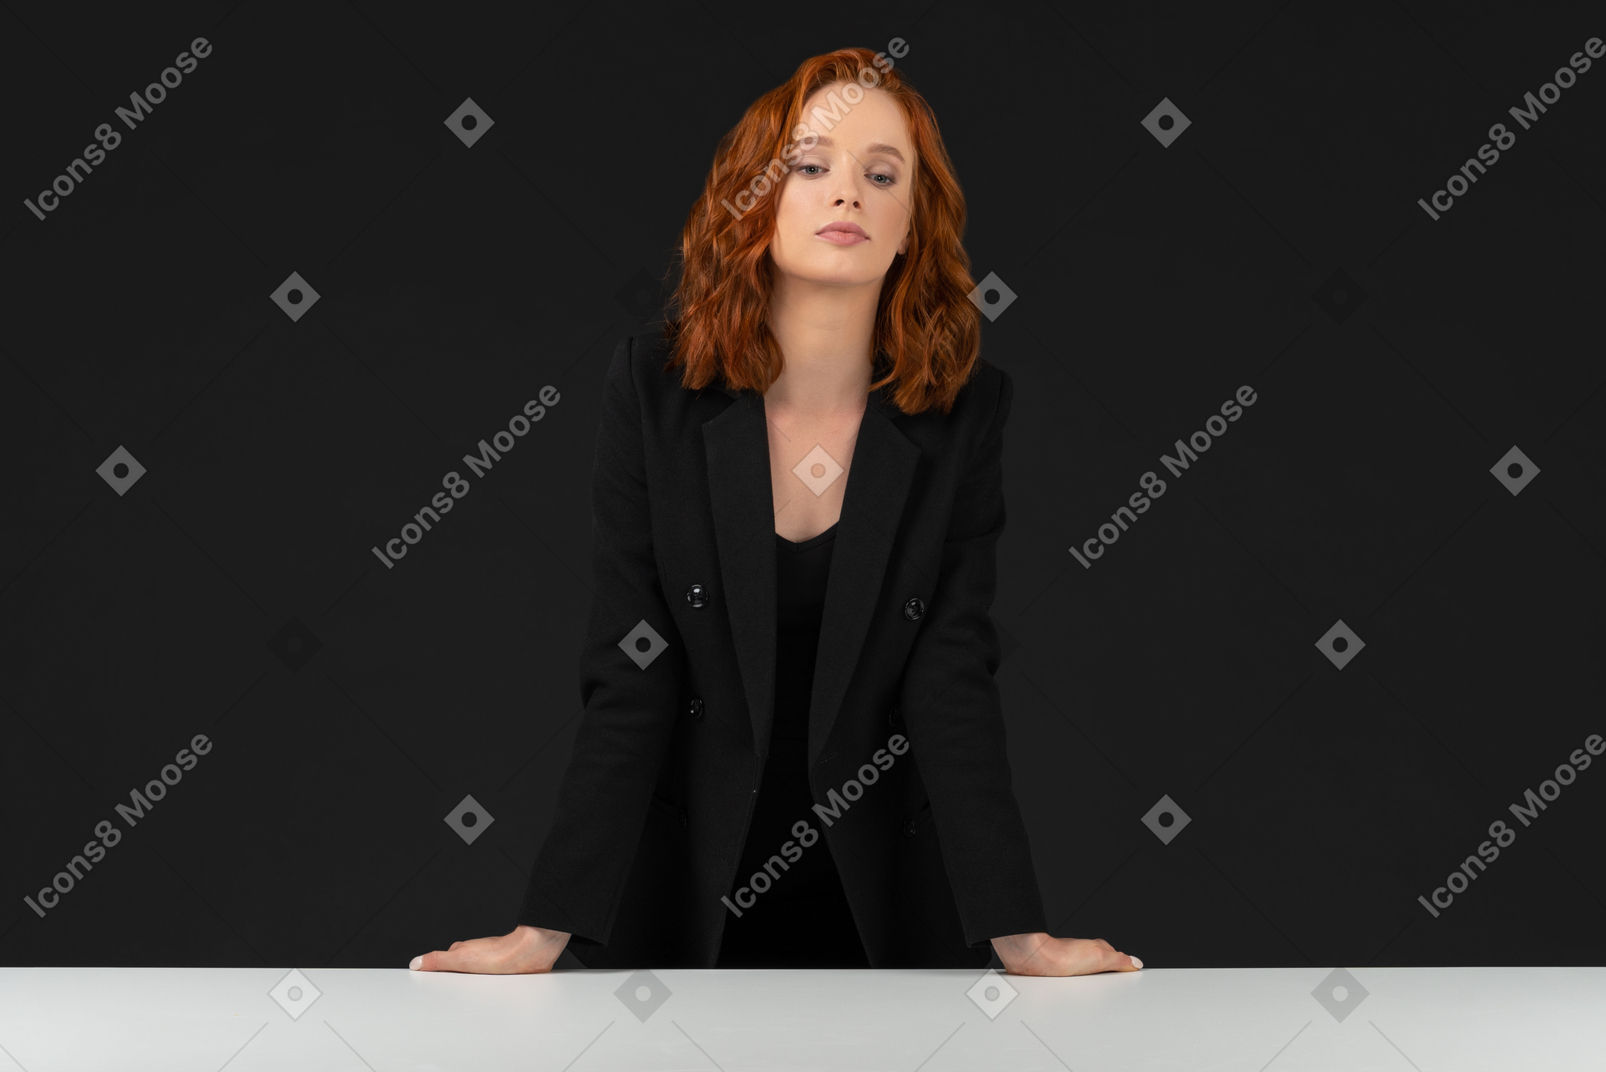 A frontal view of the cute woman dressed in black and looking at the camera